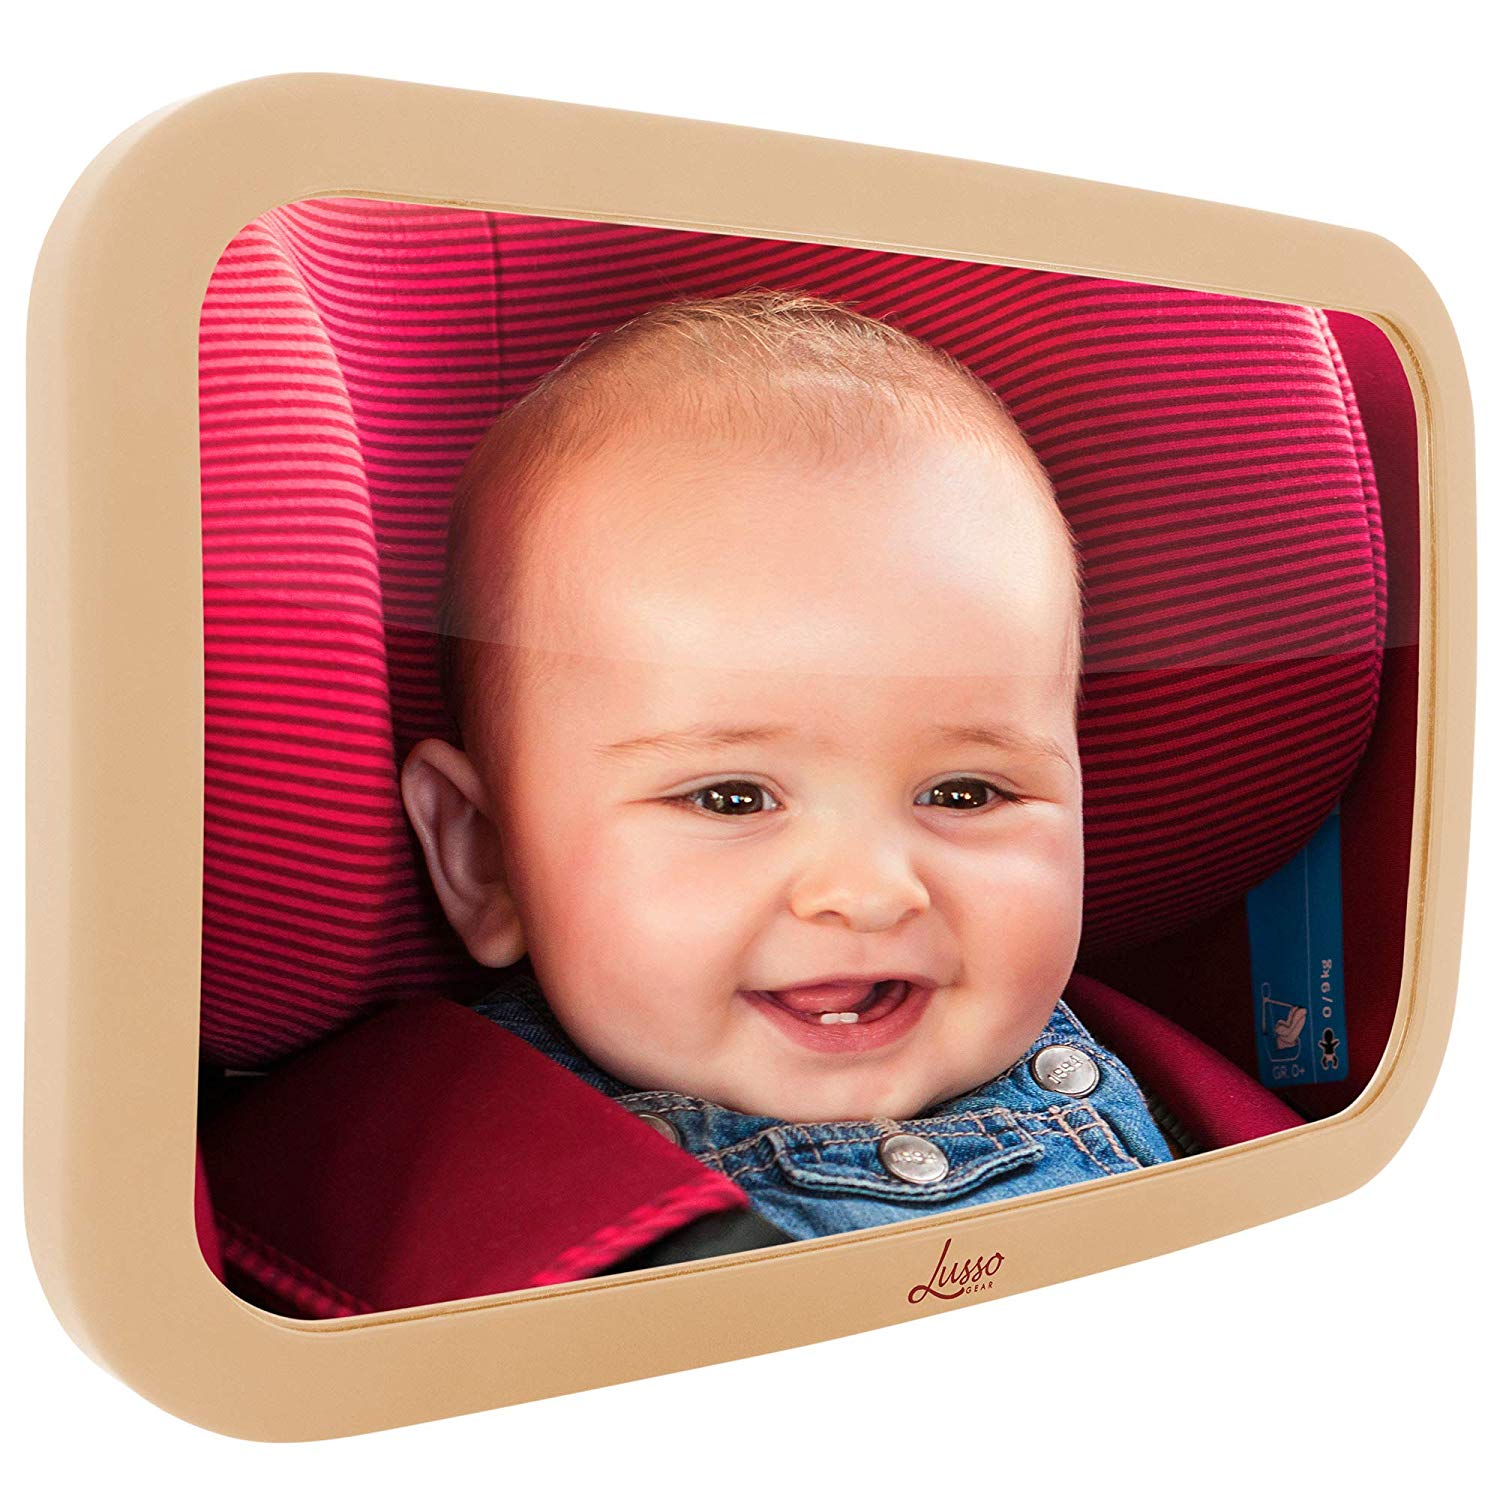 acplaypen.com Baby Backseat Mirror for Car - Largest and Most Stable Mirror with Premium Matte Finish - Crystal Clear View of Infant in Rear Facing Car Seat - Safe, Secure and Shatterproofvcv